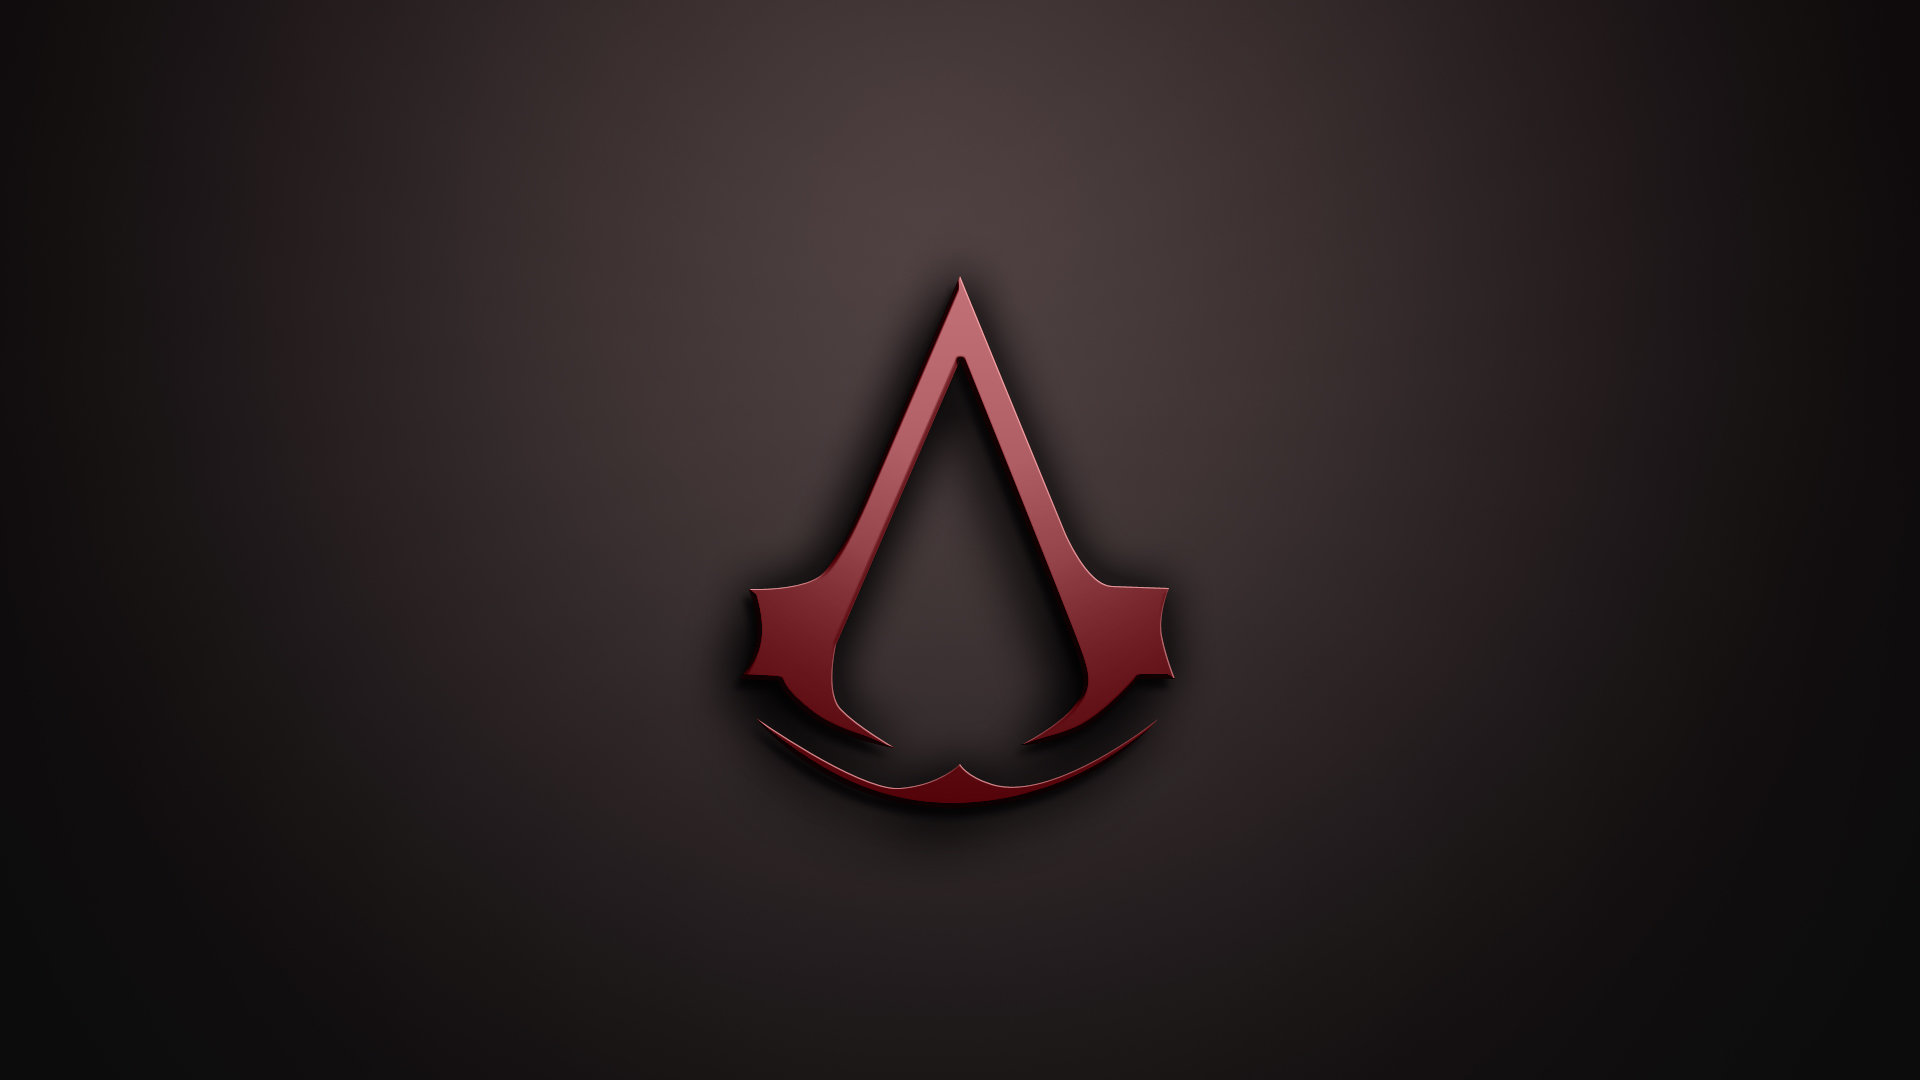 Awesome Assassin's Creed free wallpaper ID:188323 for hd 1920x1080 computer